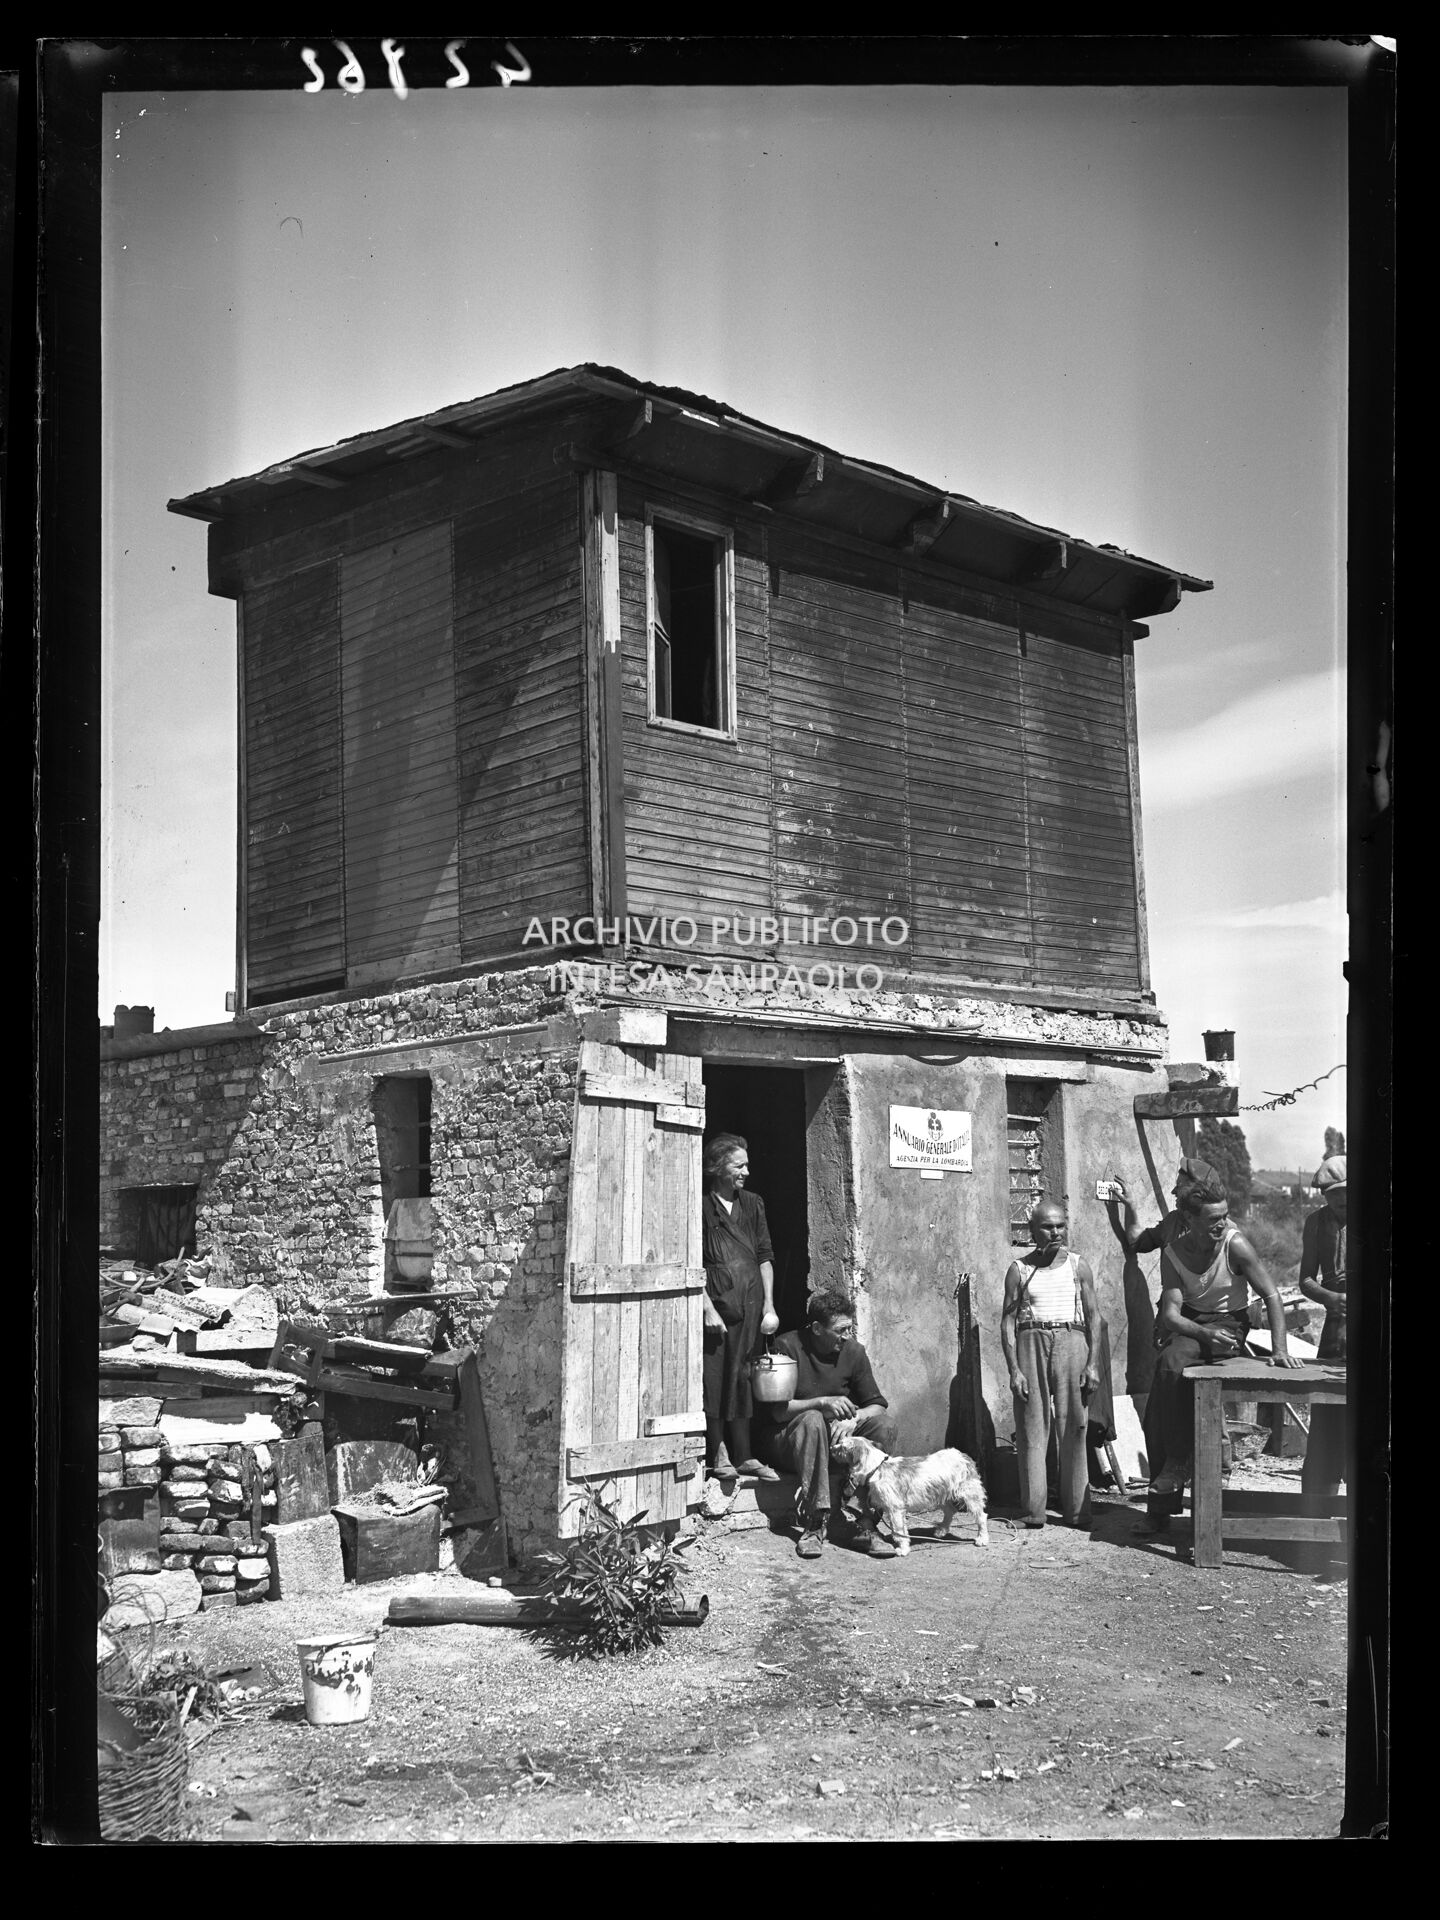 A group of people in front of a shack on the outskirts of Milan